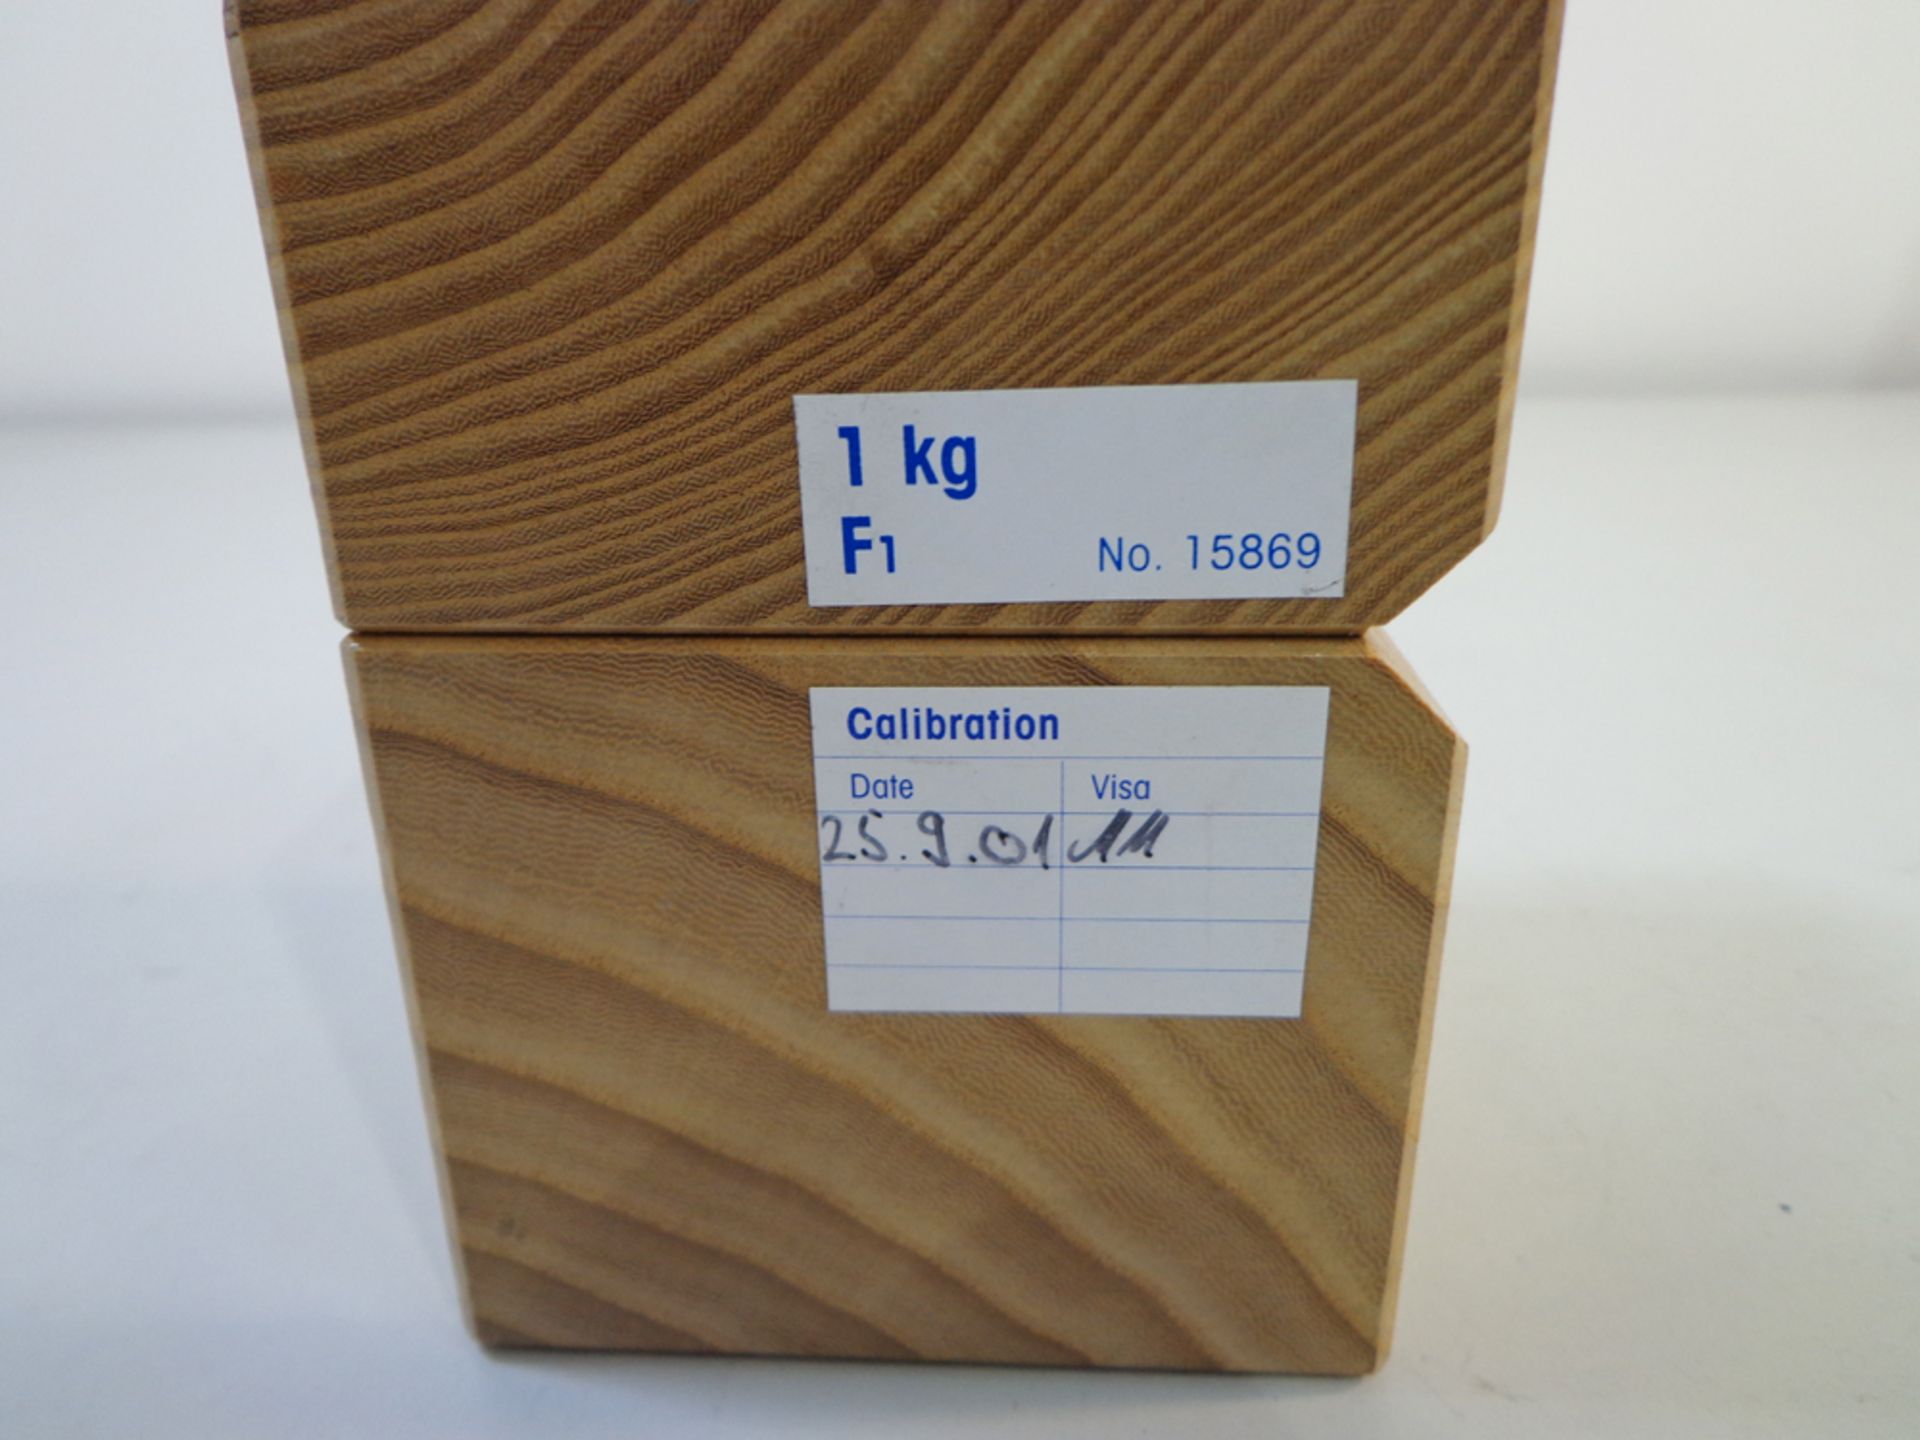 Mettler Toledo Single 1kg F1 Stainless Steel Calibration Weight in Wooden Box, Ref 15869 - Image 3 of 4